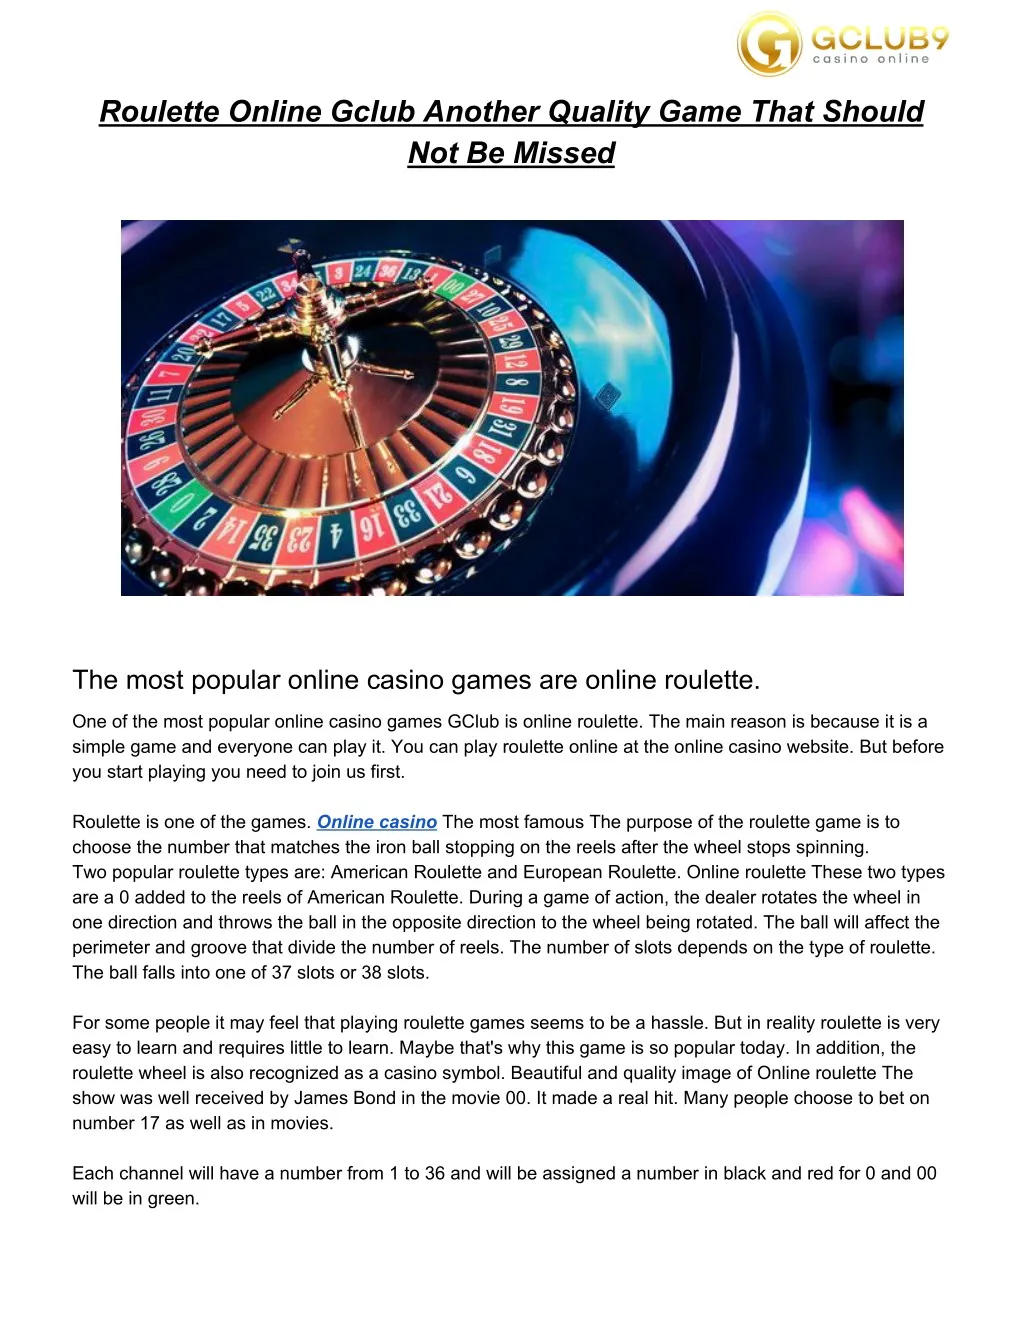 roulette online gclub another quality game that